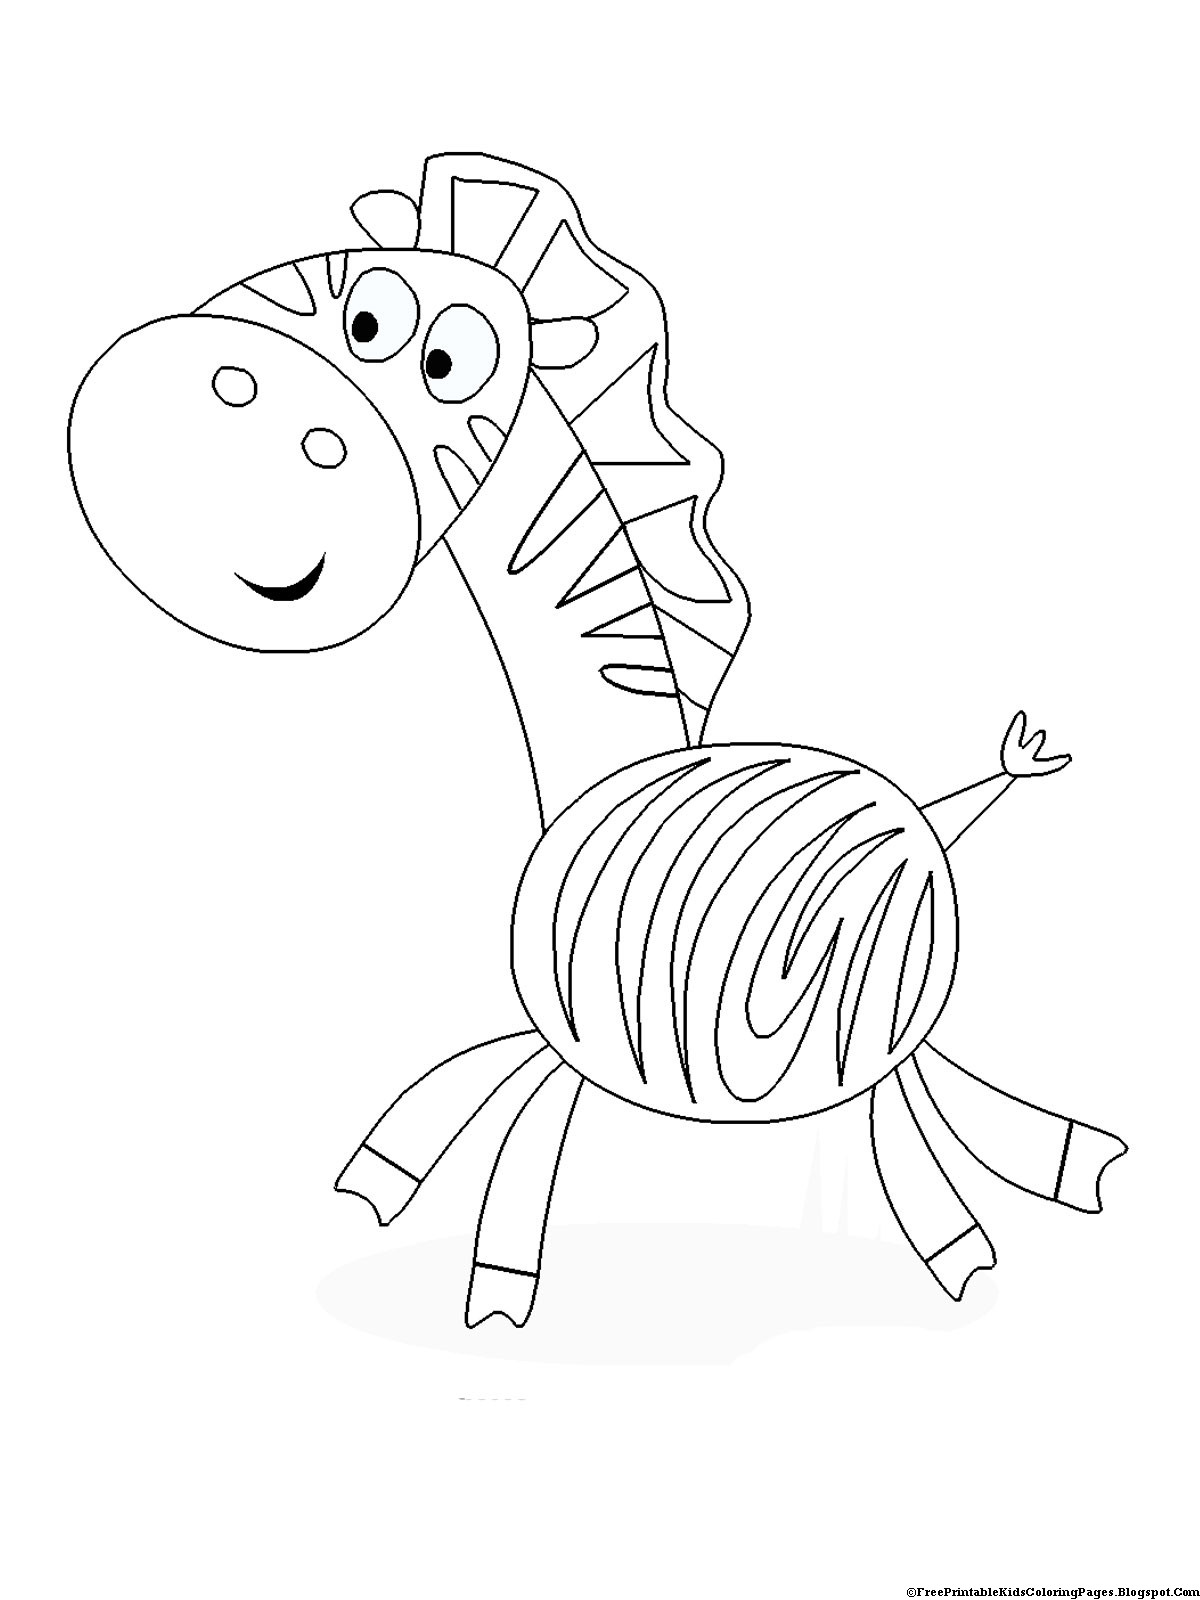 Print Coloring Book
 Zebra Coloring Pages Free Printable Kids Coloring Pages